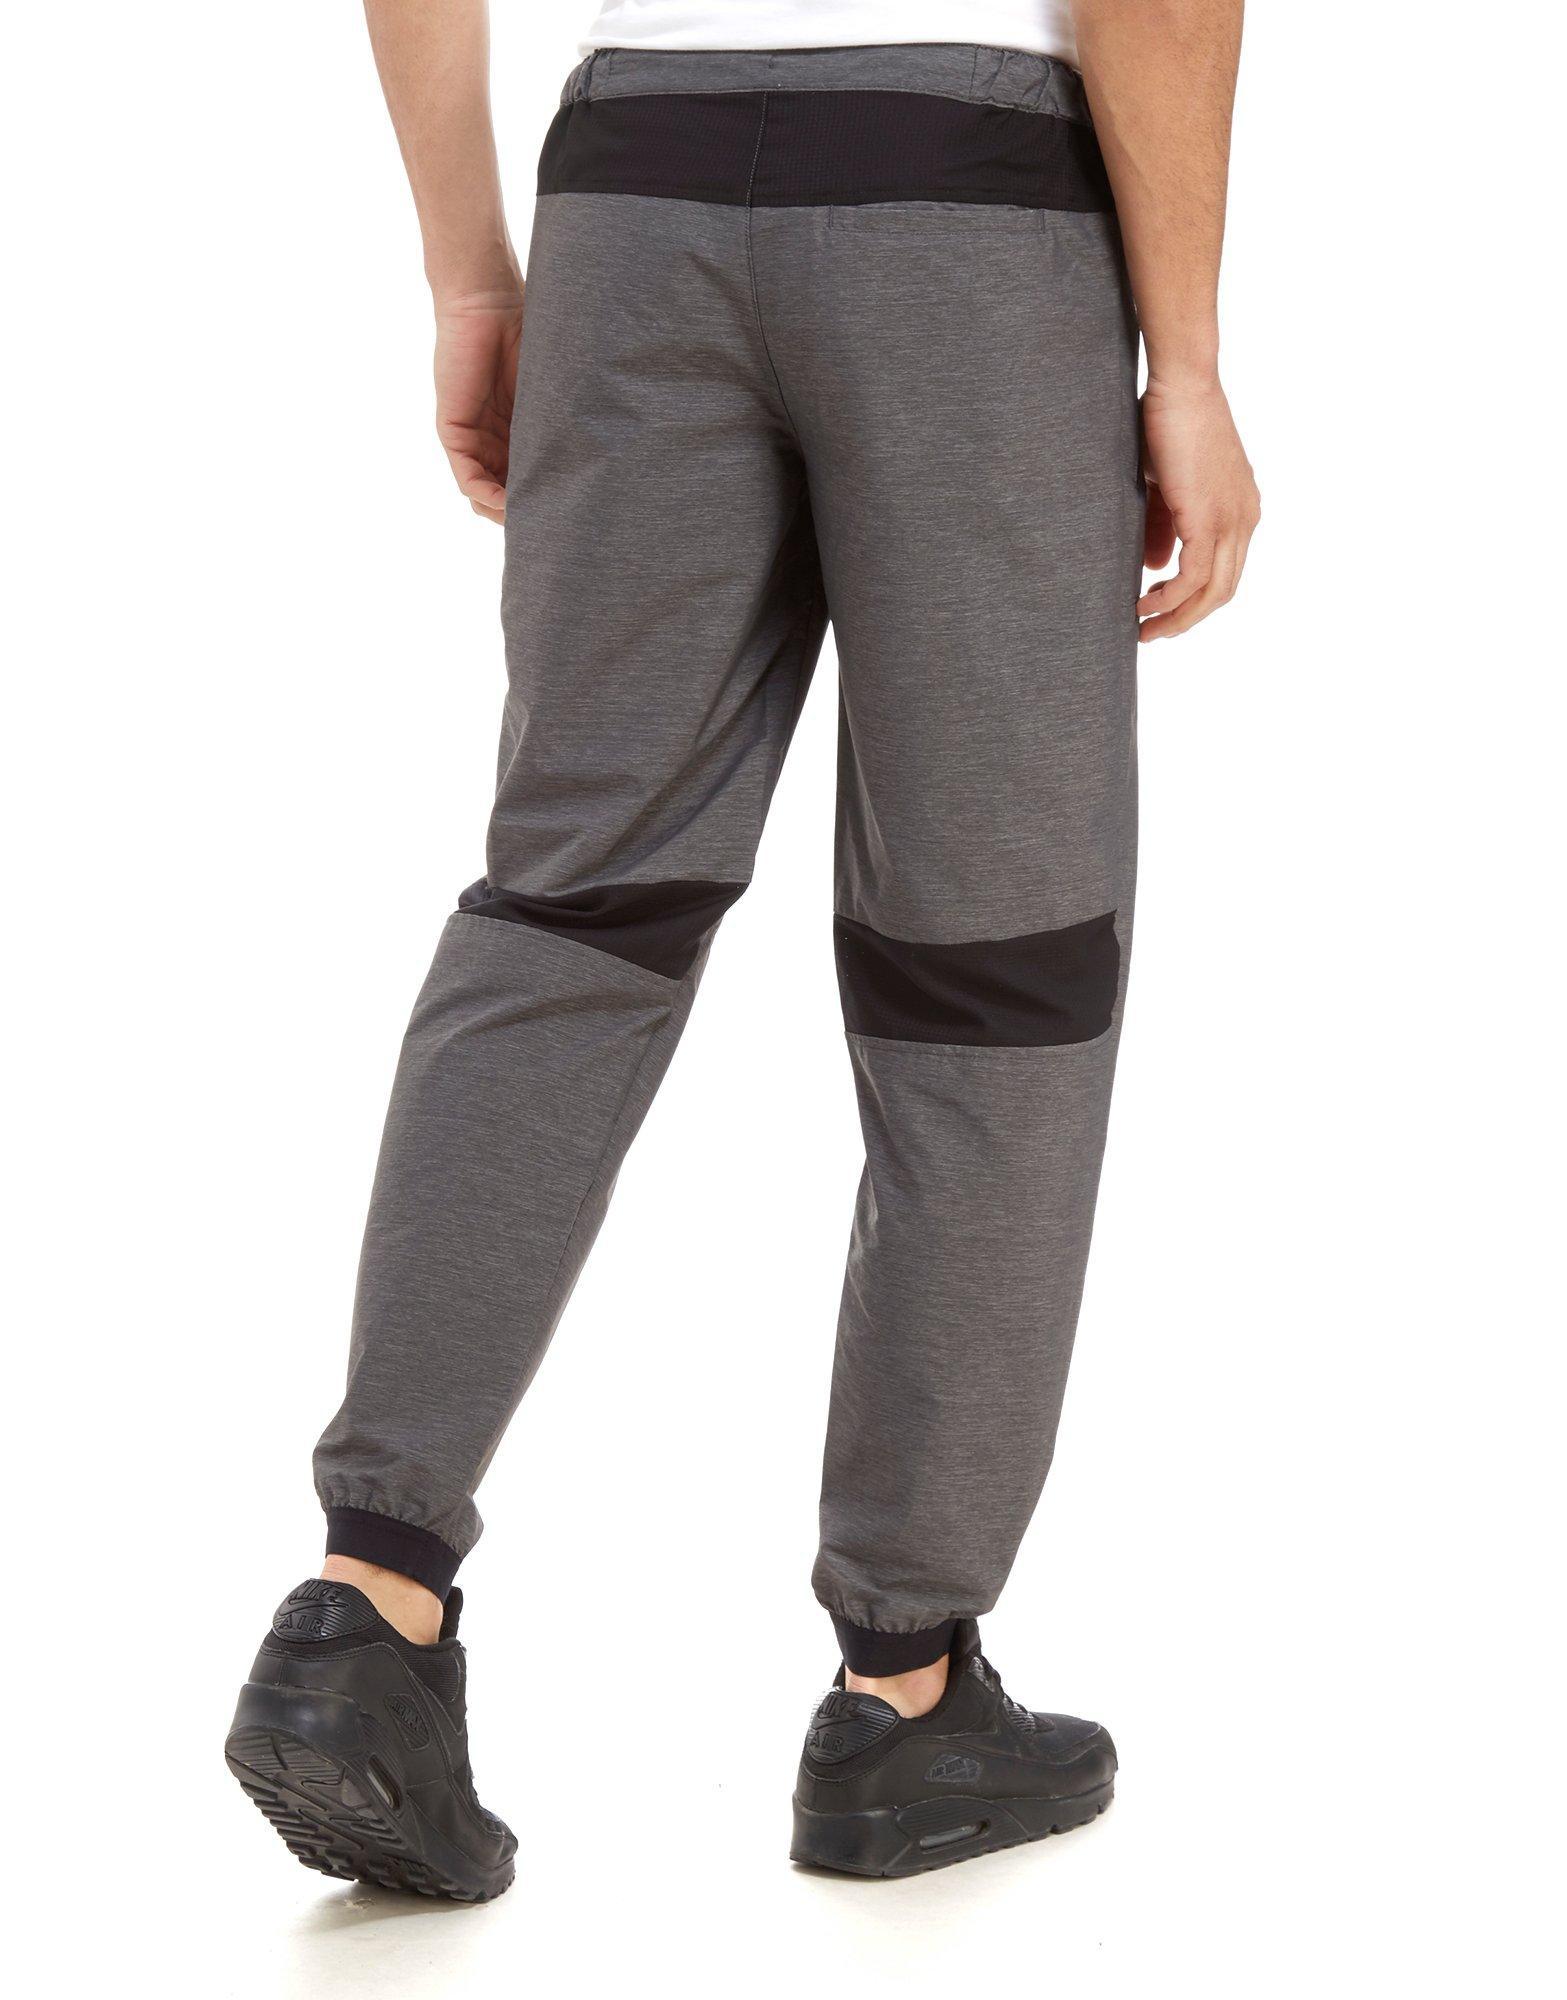 The North Face Synthetic Ondras Woven Pants in Grey (Grey) for Men - Lyst